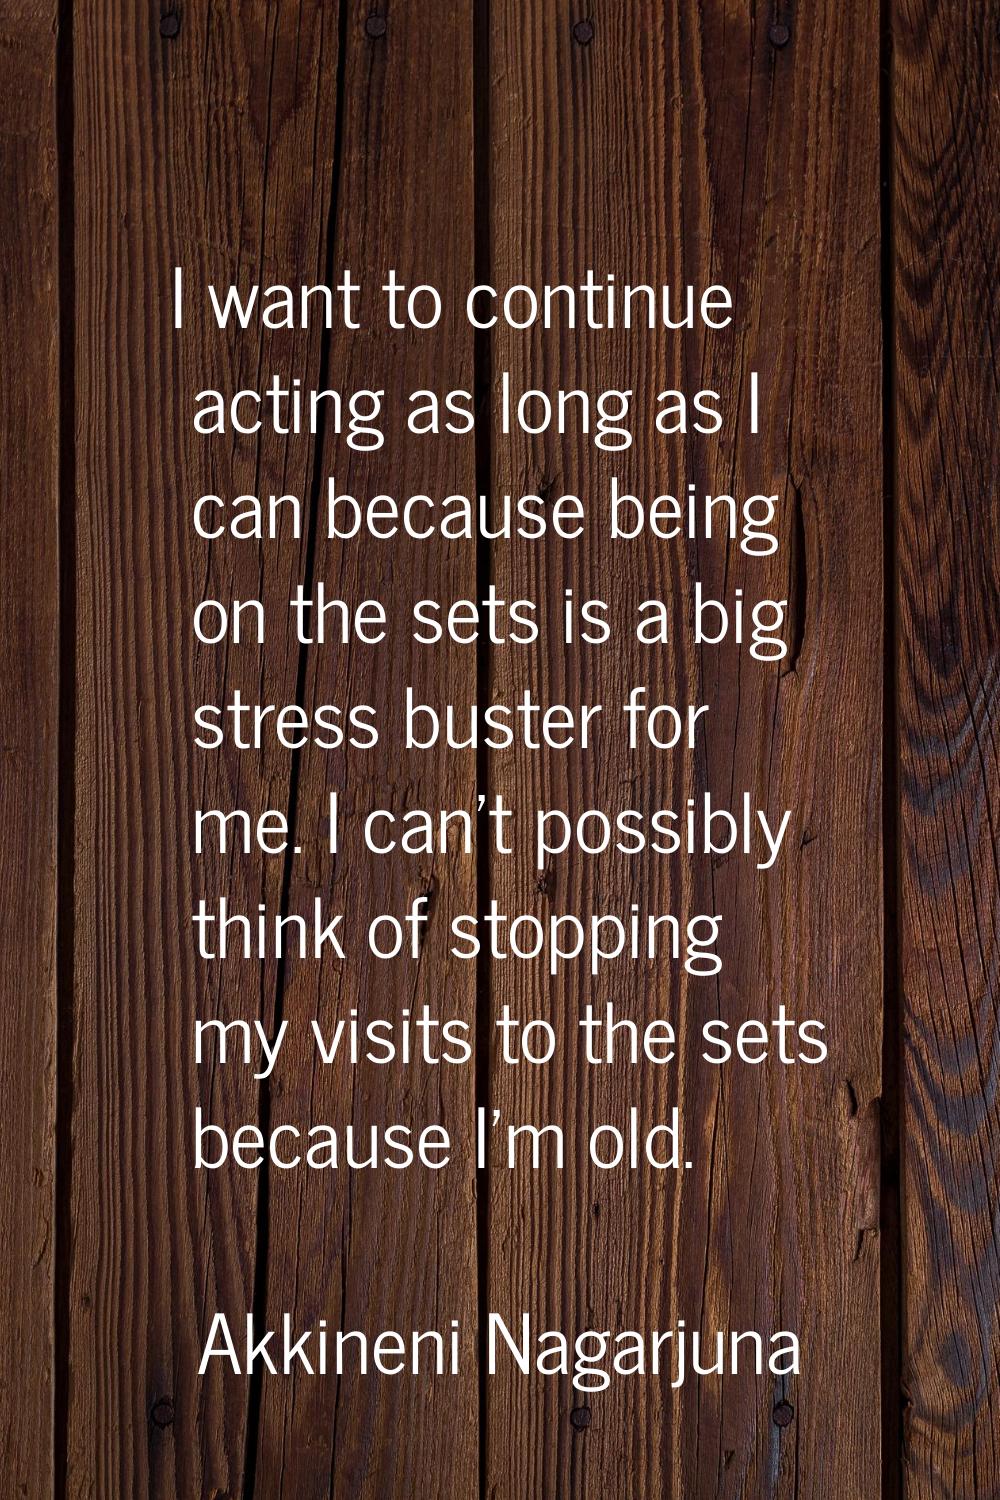 I want to continue acting as long as I can because being on the sets is a big stress buster for me.